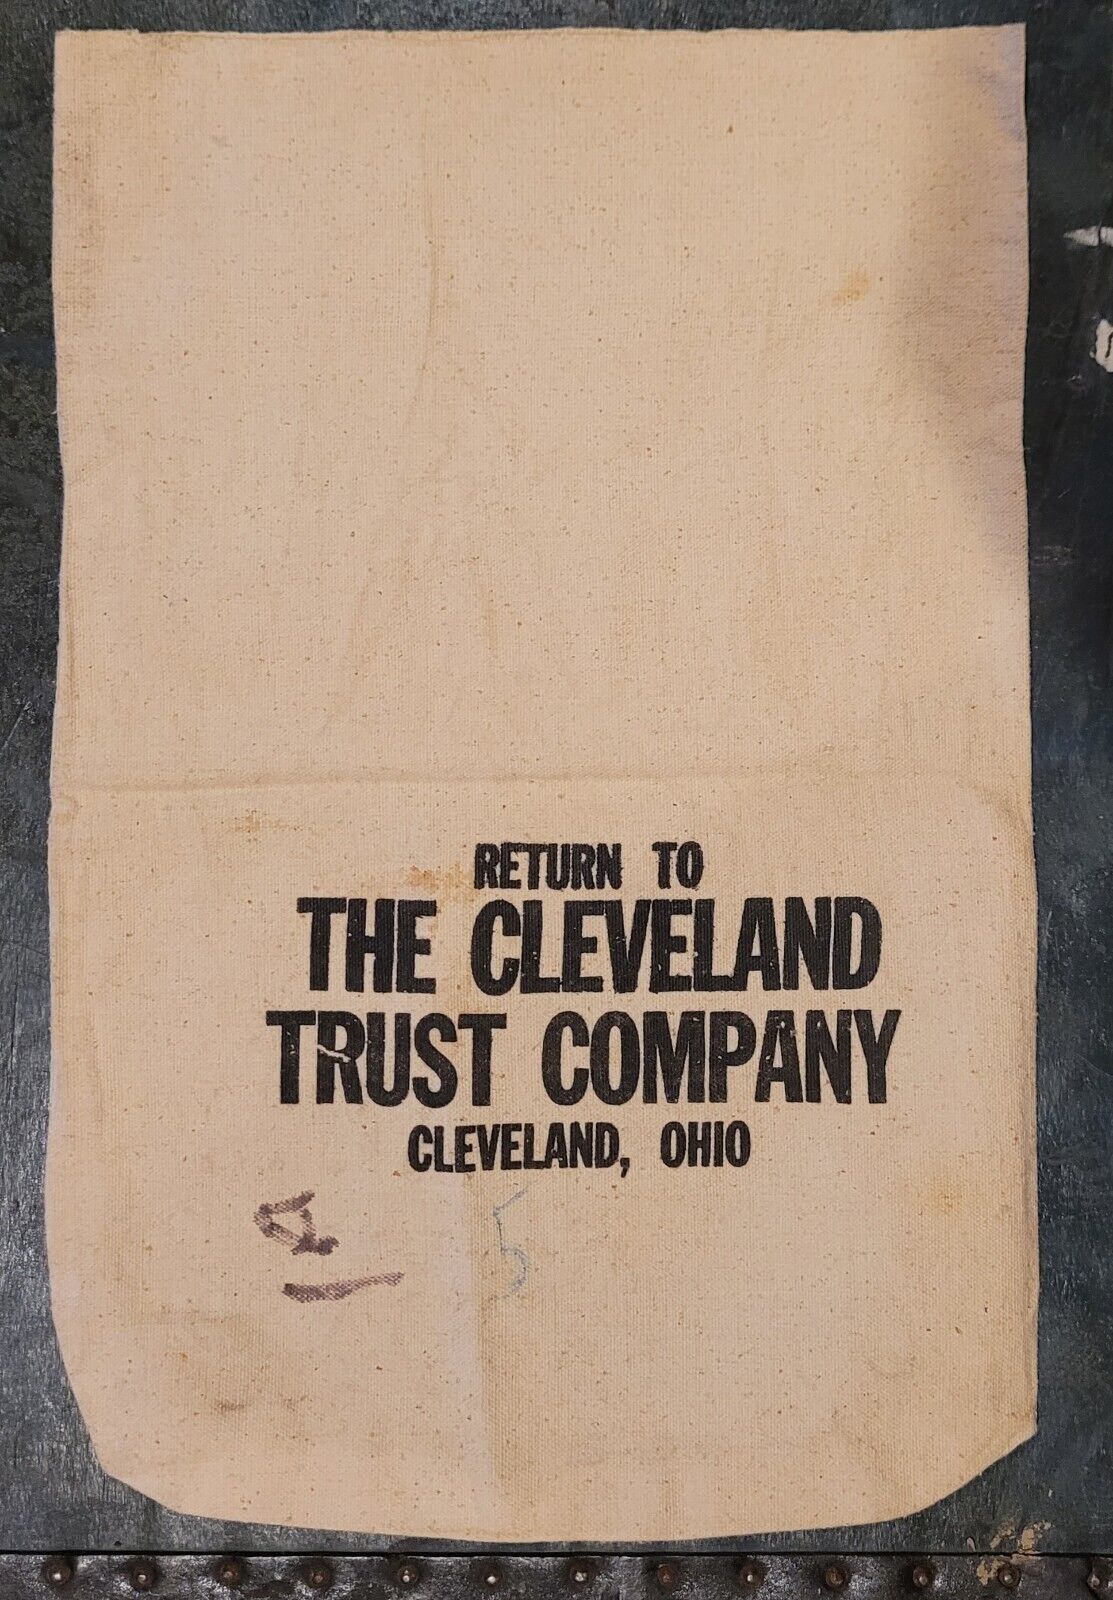 Vintage Canvas Coin Bag The Cleveland Trust Company About 17 in x 11 in - A